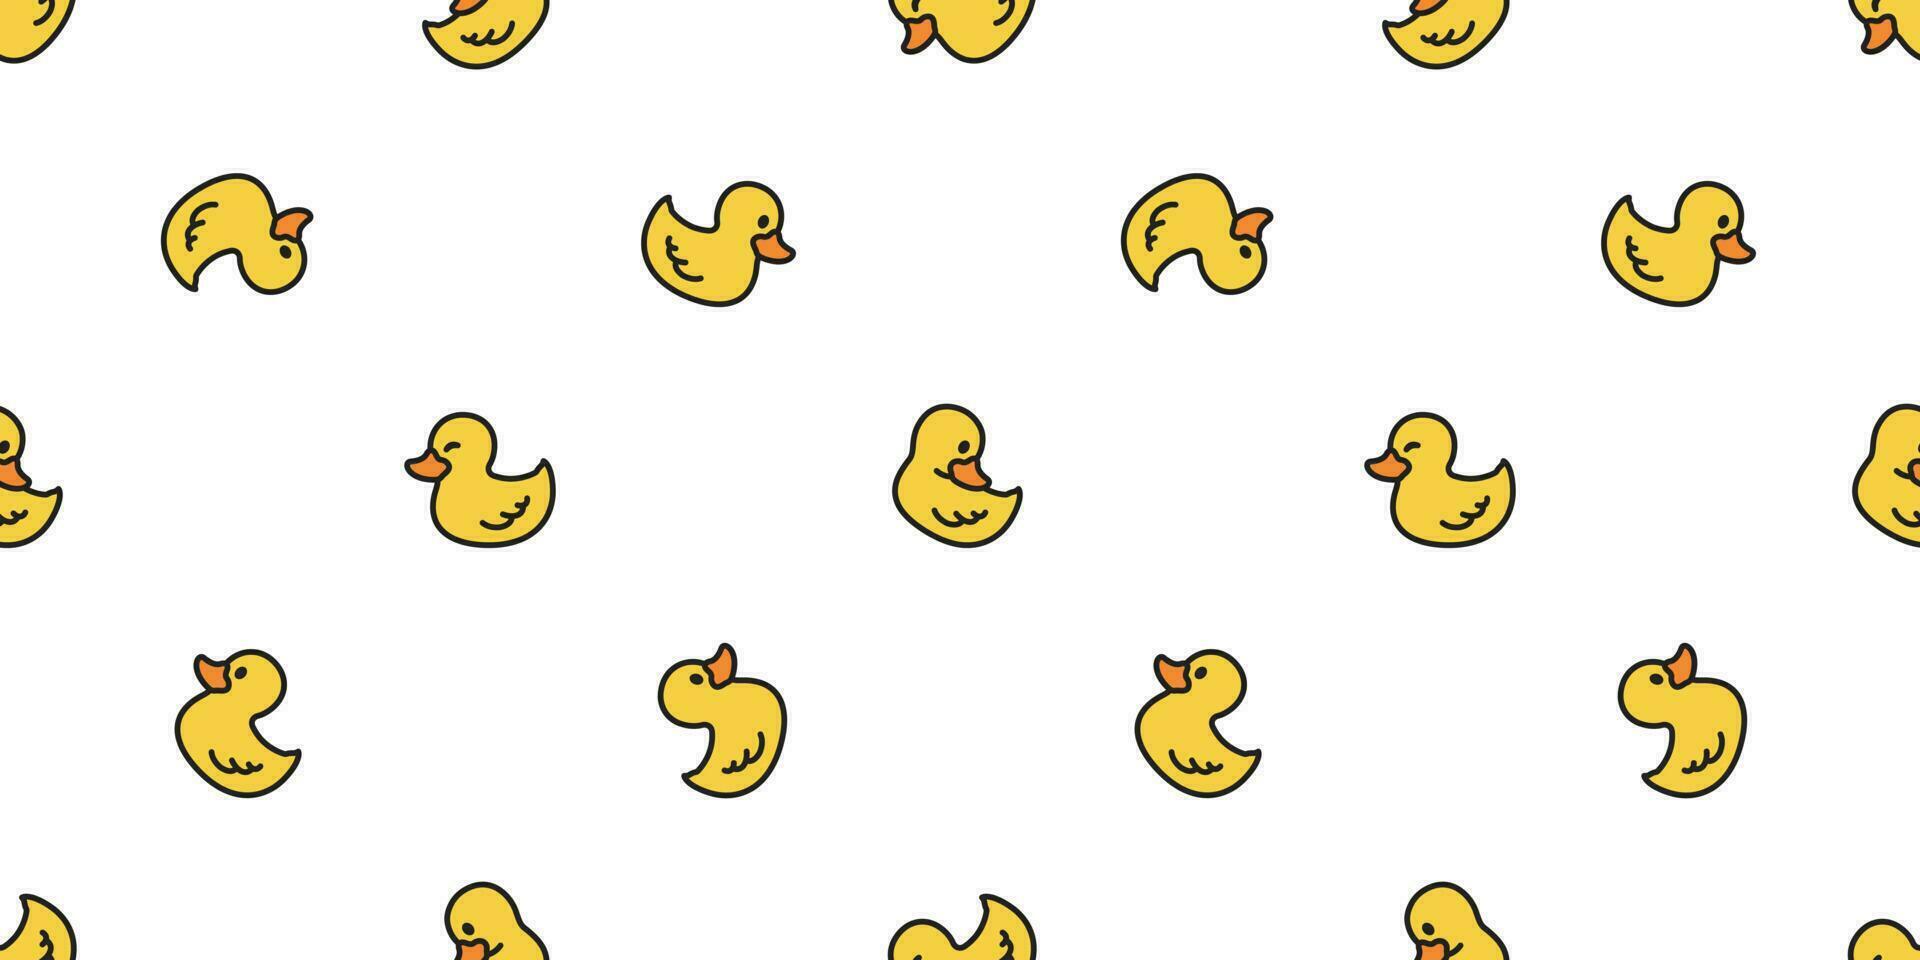 duck seamless pattern vector rubber duck tile background repeat wallpaper scarf isolated cartoon illustration yellow